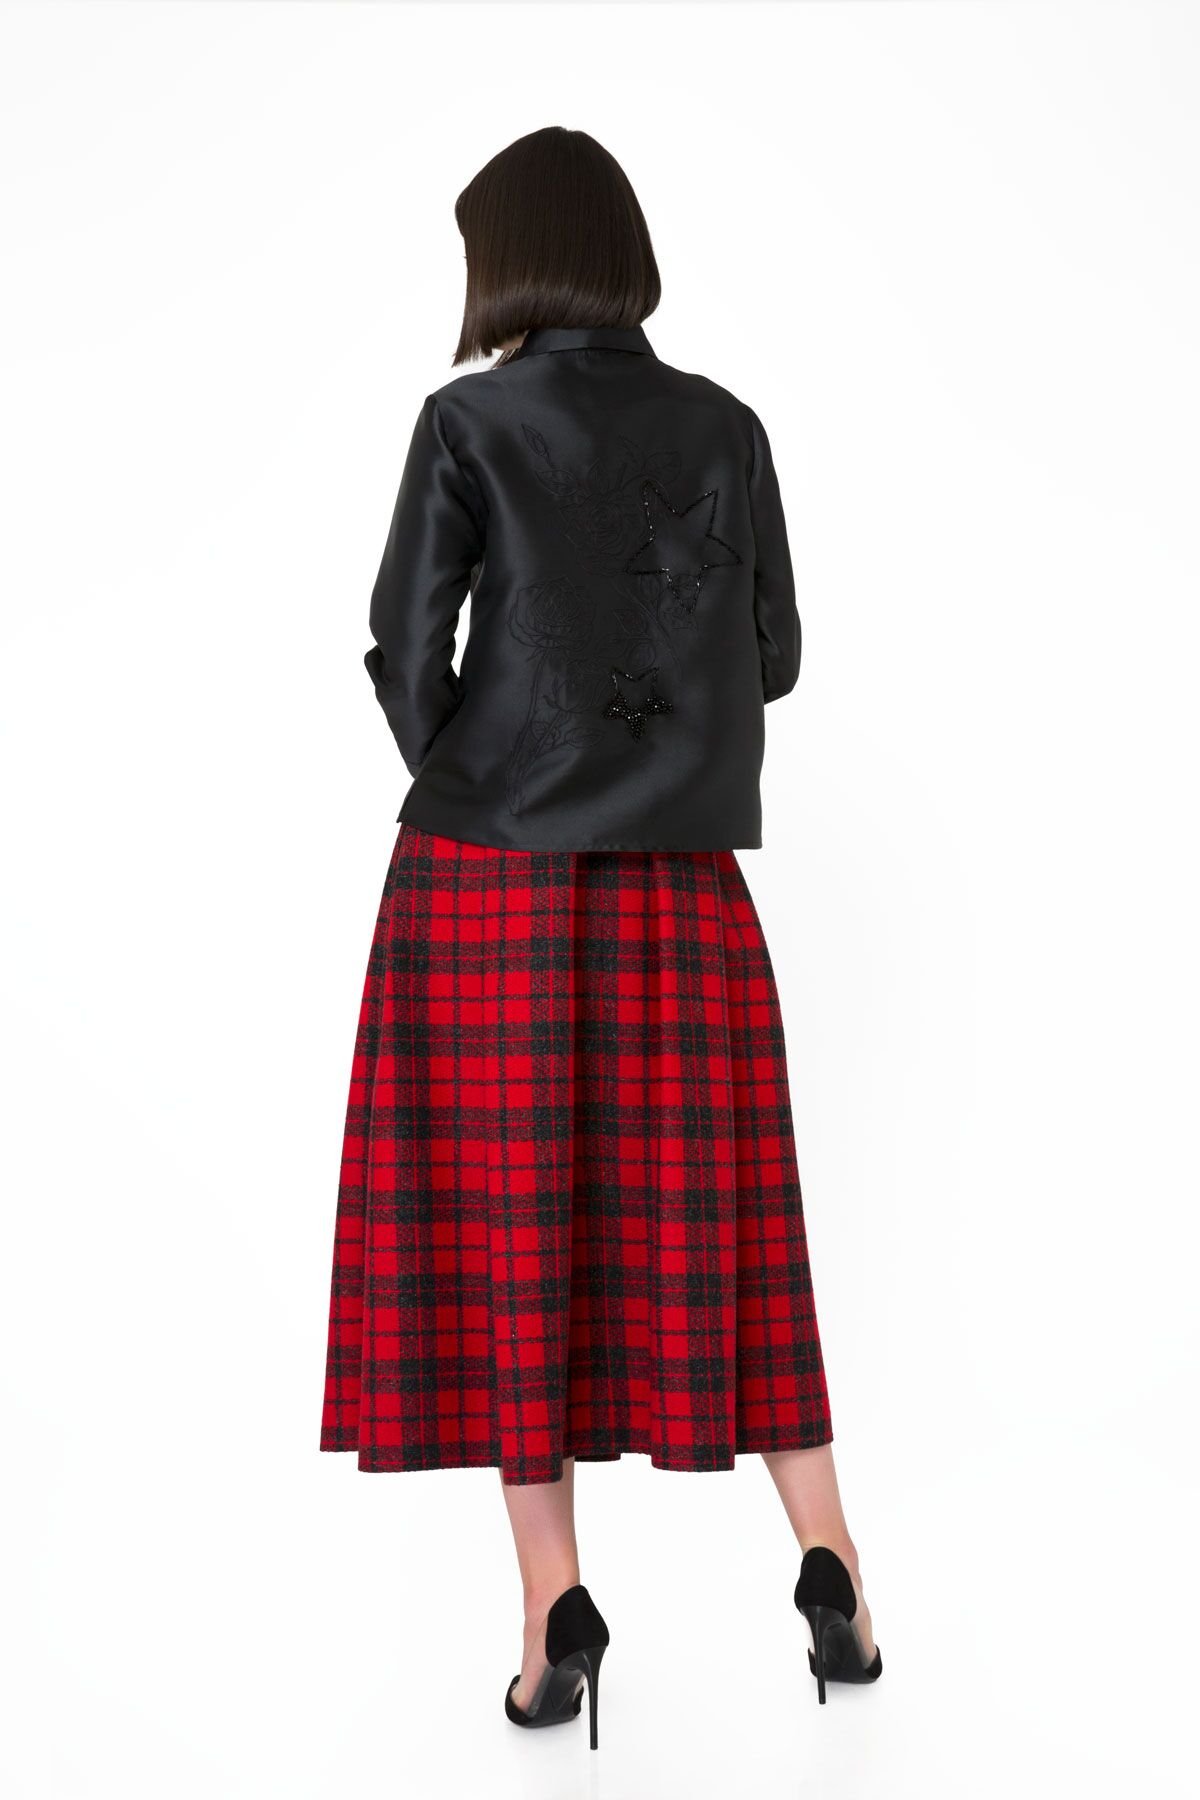 Checked Patterned Tweed Fabric Voluminous Red Skirt